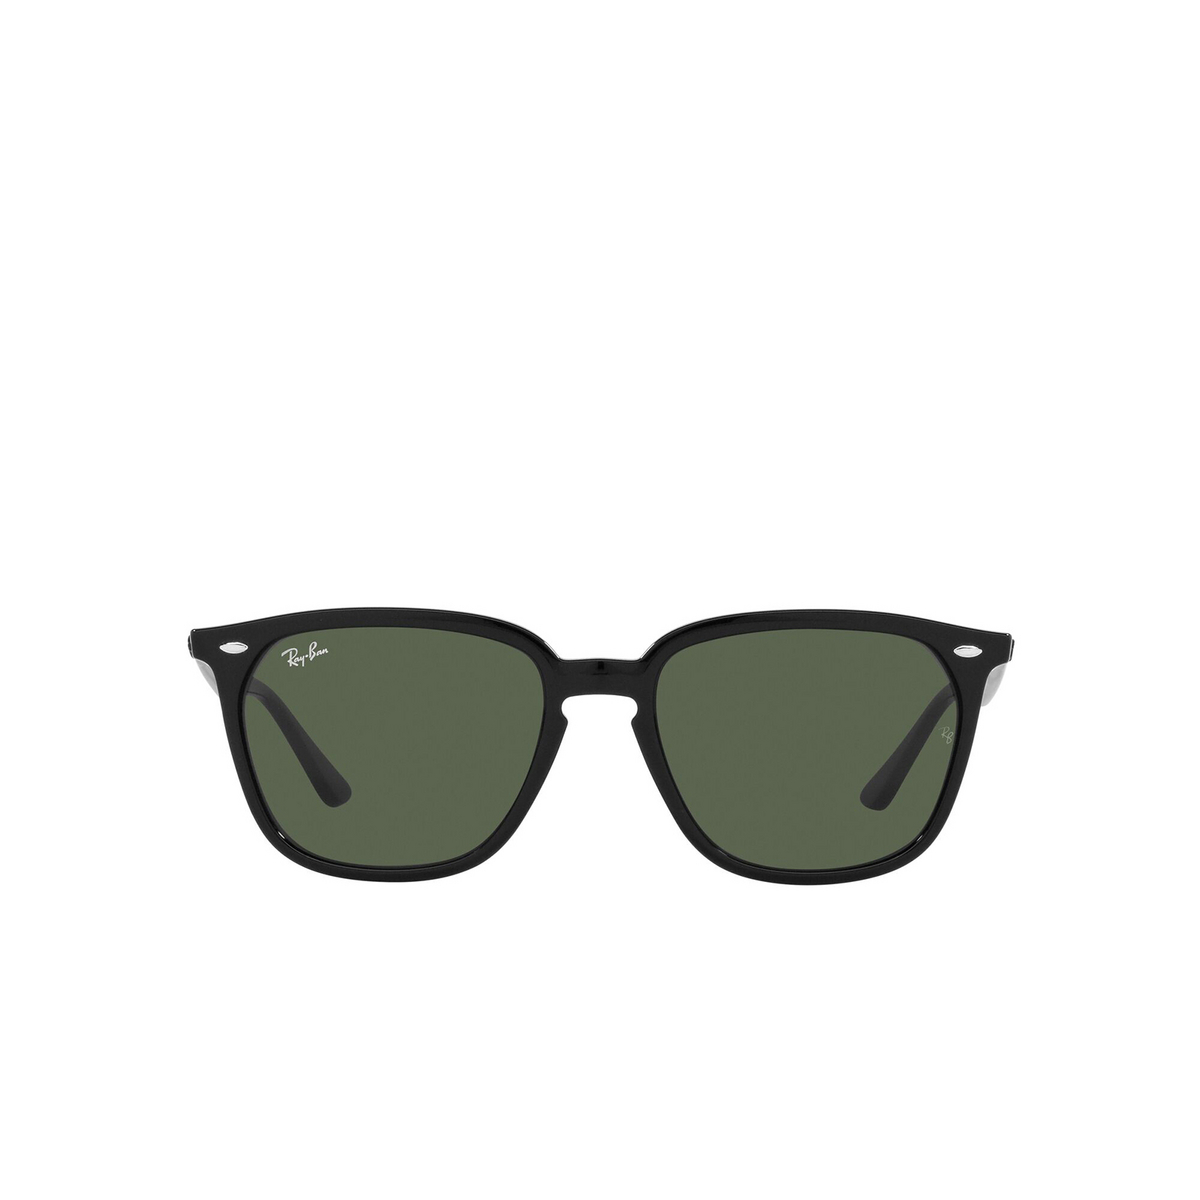 Ray-Ban® Square Sunglasses: RB4362 color Black 601/71 - front view.